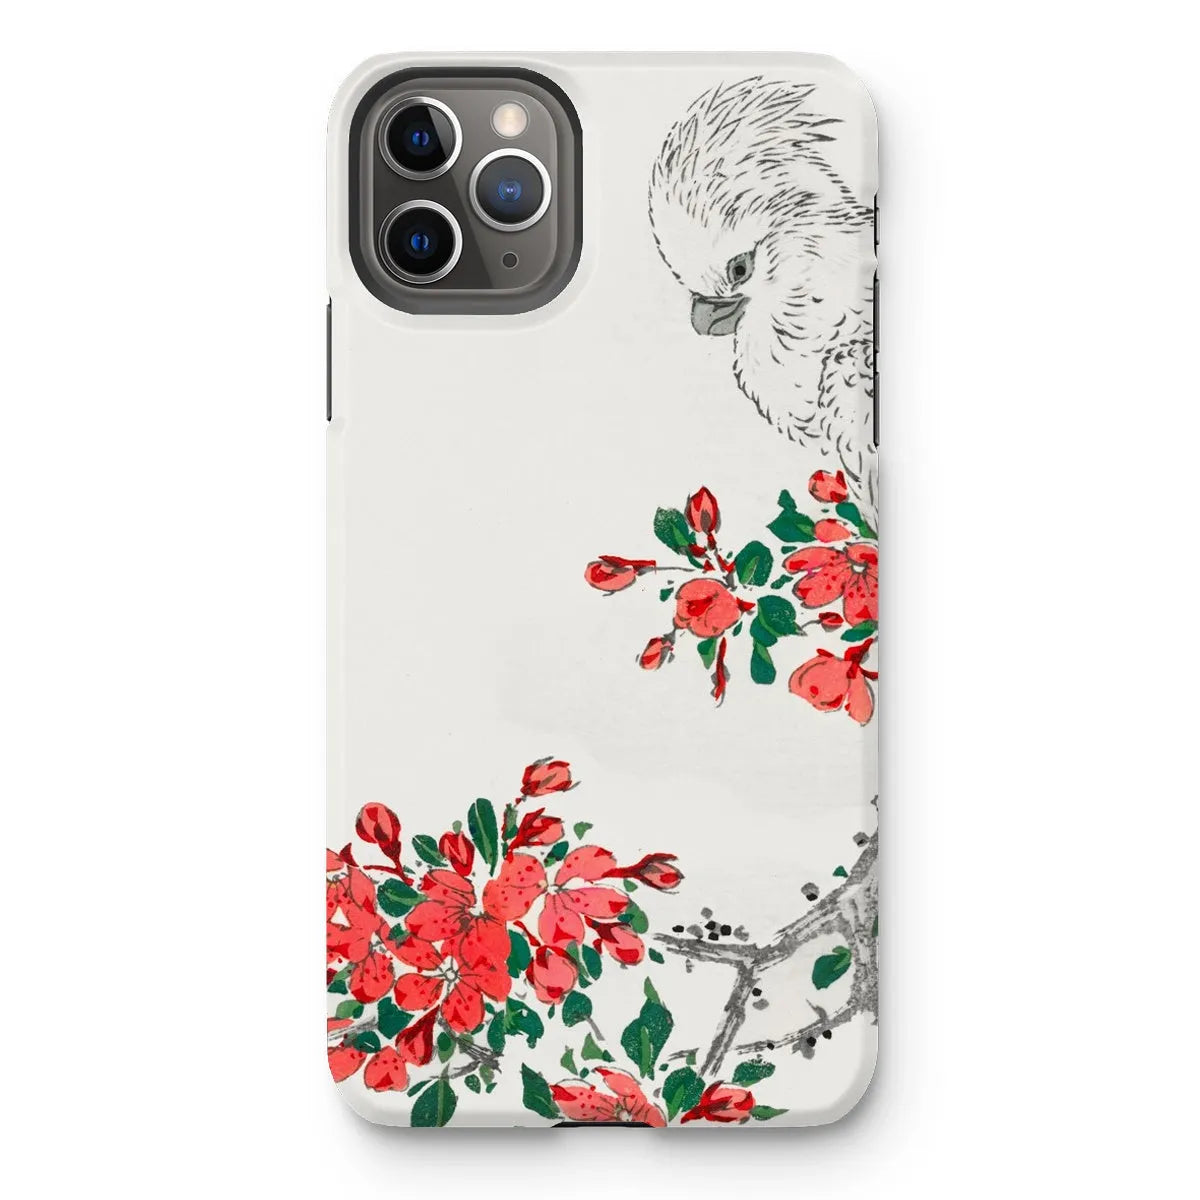 Parrot And Pyrus - Japanese Bird Phone Case - Numata Kashu - Iphone 11 Pro Max / Matte - Mobile Phone Cases - Aesthetic